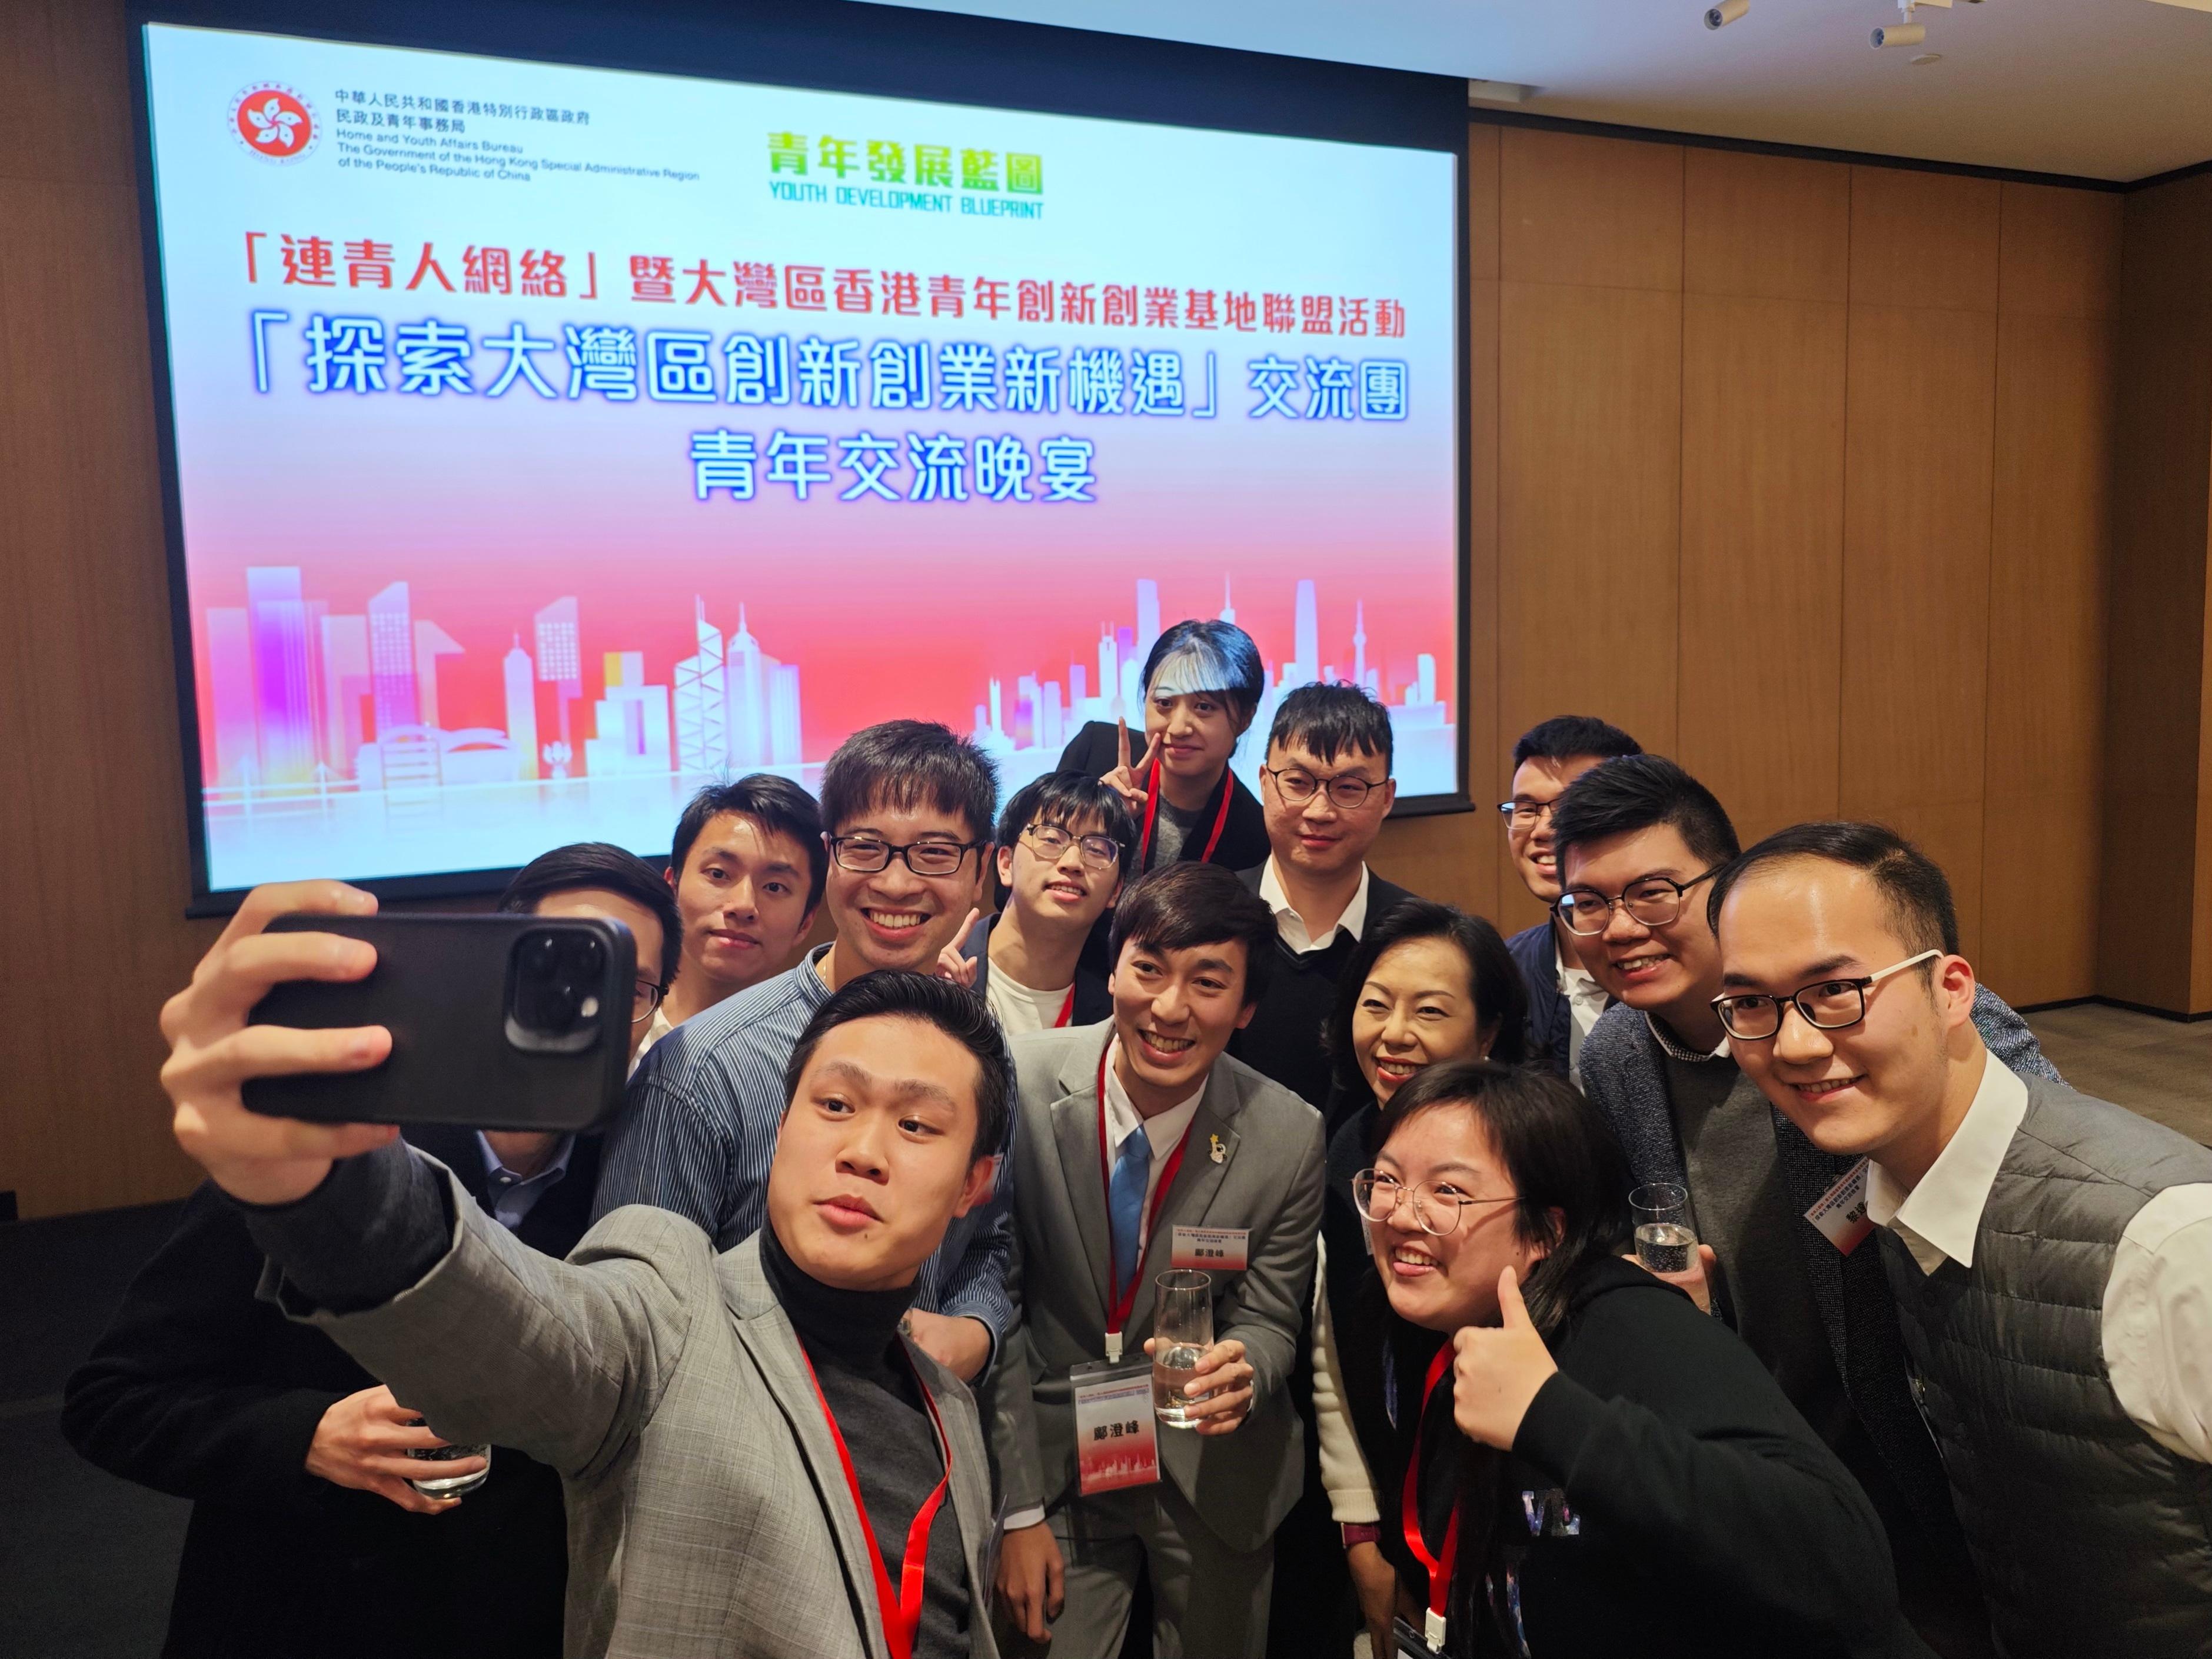 The Secretary for Home and Youth Affairs, Miss Alice Mak (second row, second right), and members of the Youth Link met with representatives of the Hong Kong’s chambers of commerce in Guangdong Province today (March 1), to learn about their living and working conditions on the Mainland.